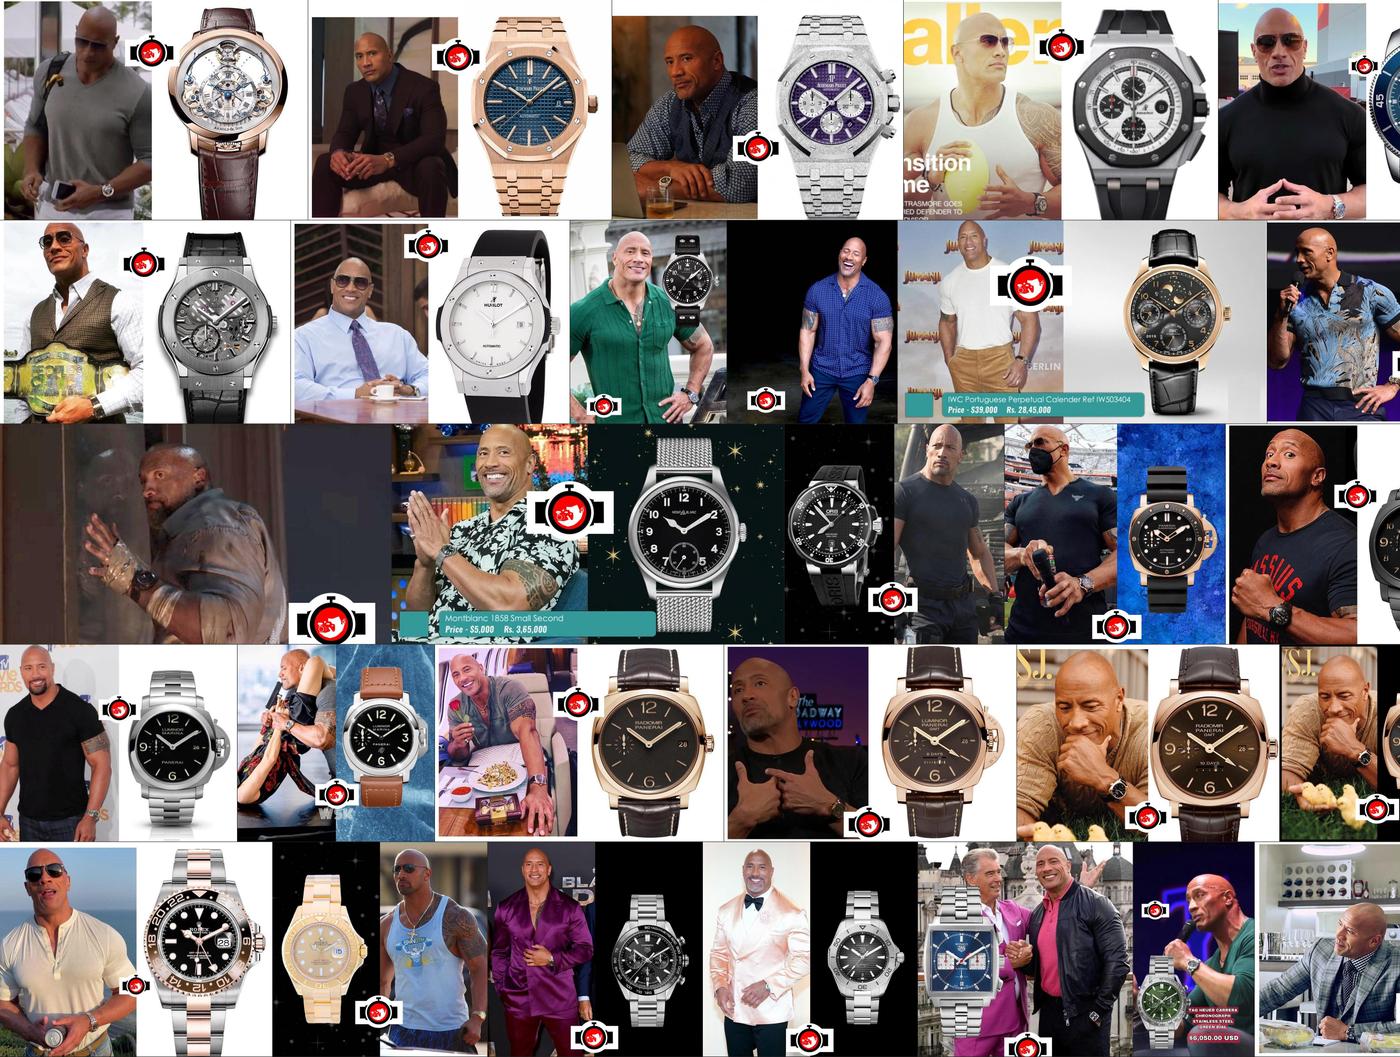 Dwayne The Rock Johnson's Watch Collection: A Captivating Lineup of Luxury Timepieces